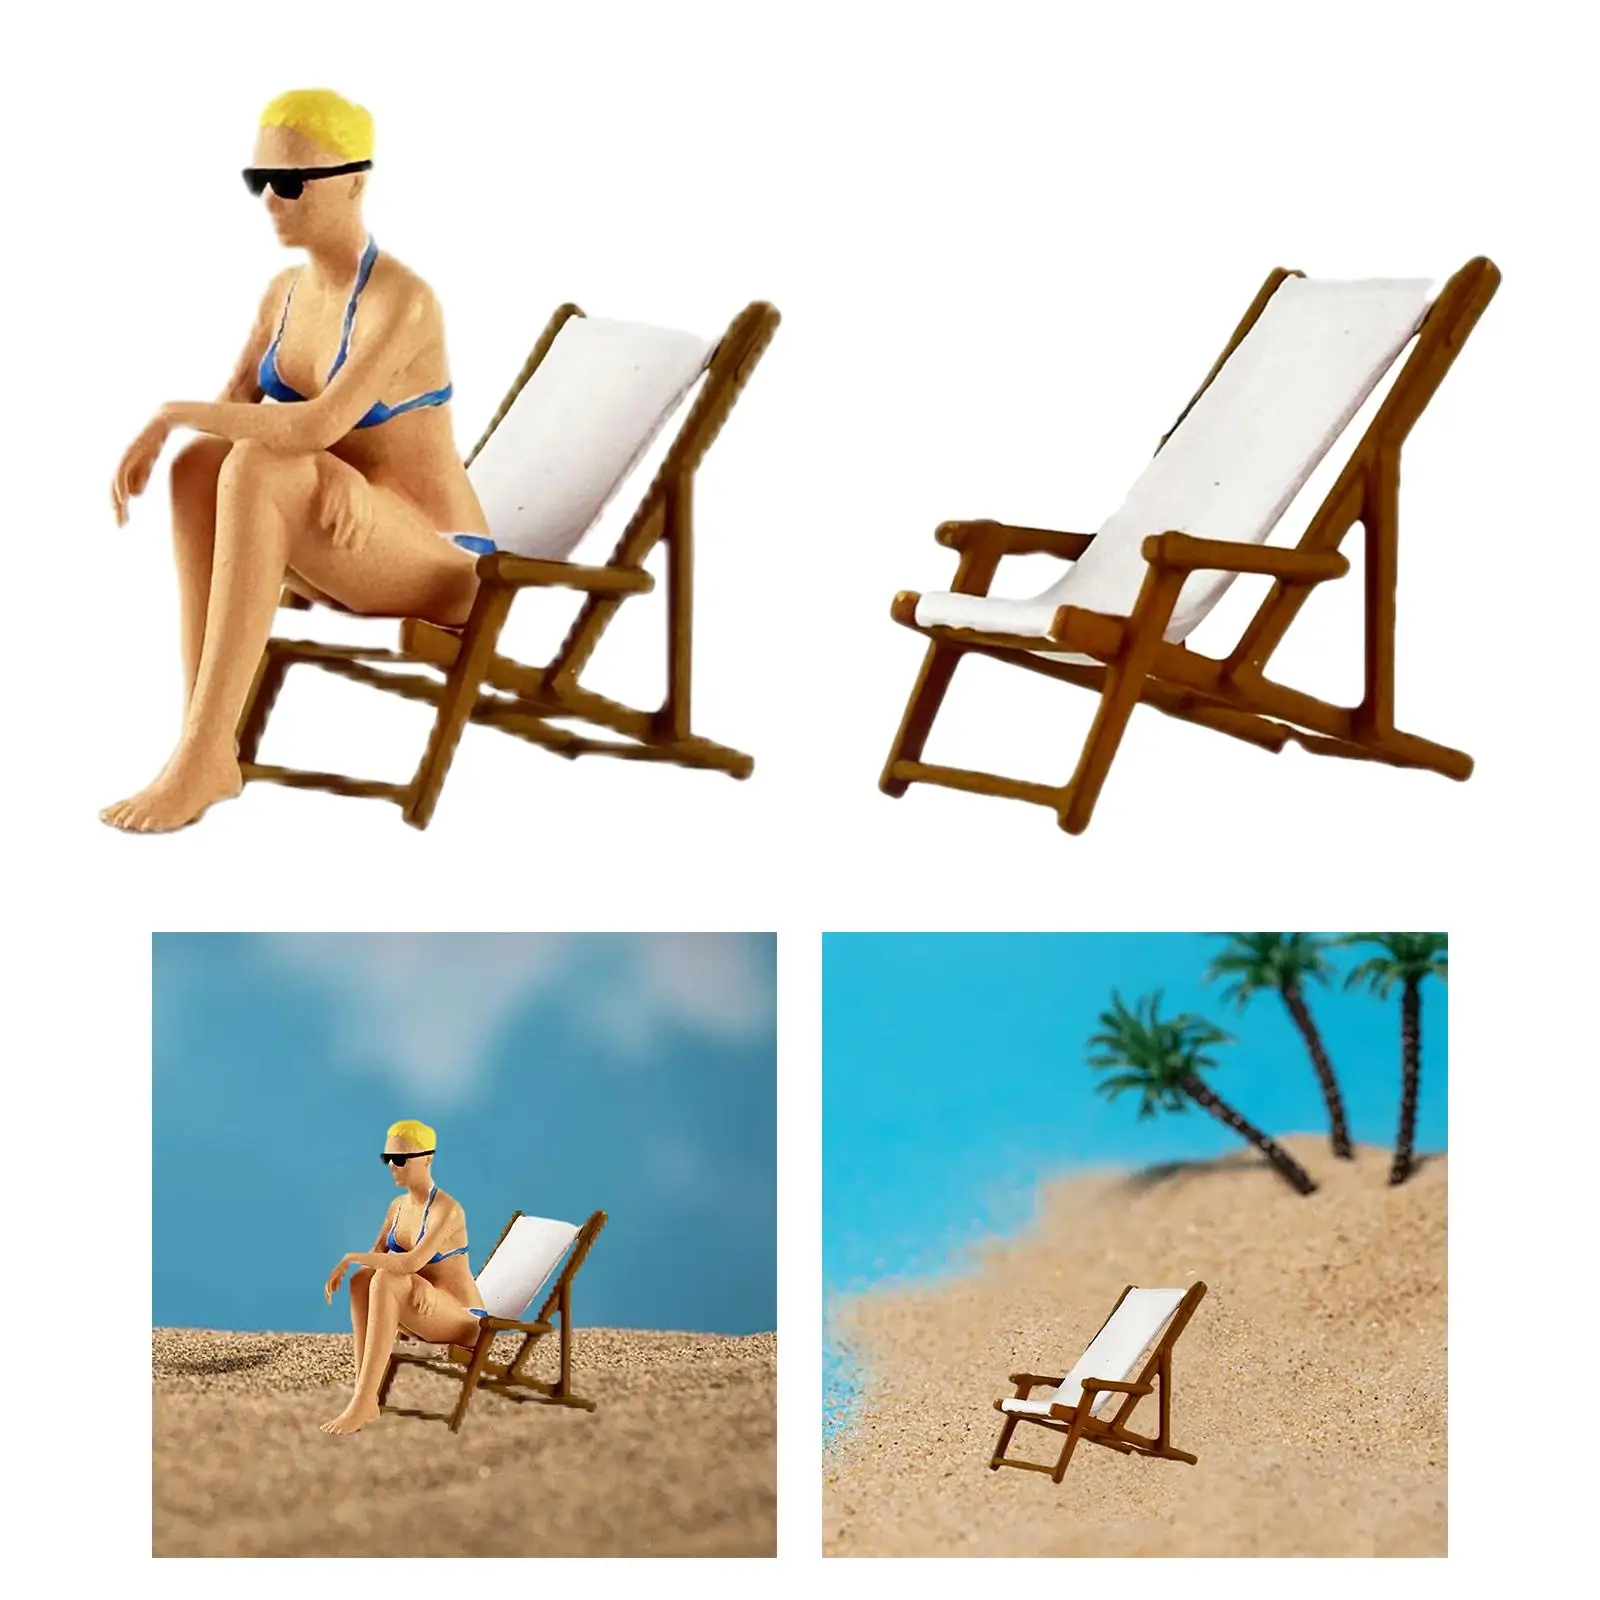 1/64 Scale Diorama Figure Painted Lounge Chair Model for DIY Projects Doll House Decoration Architecture Model Kids Adults Gifts